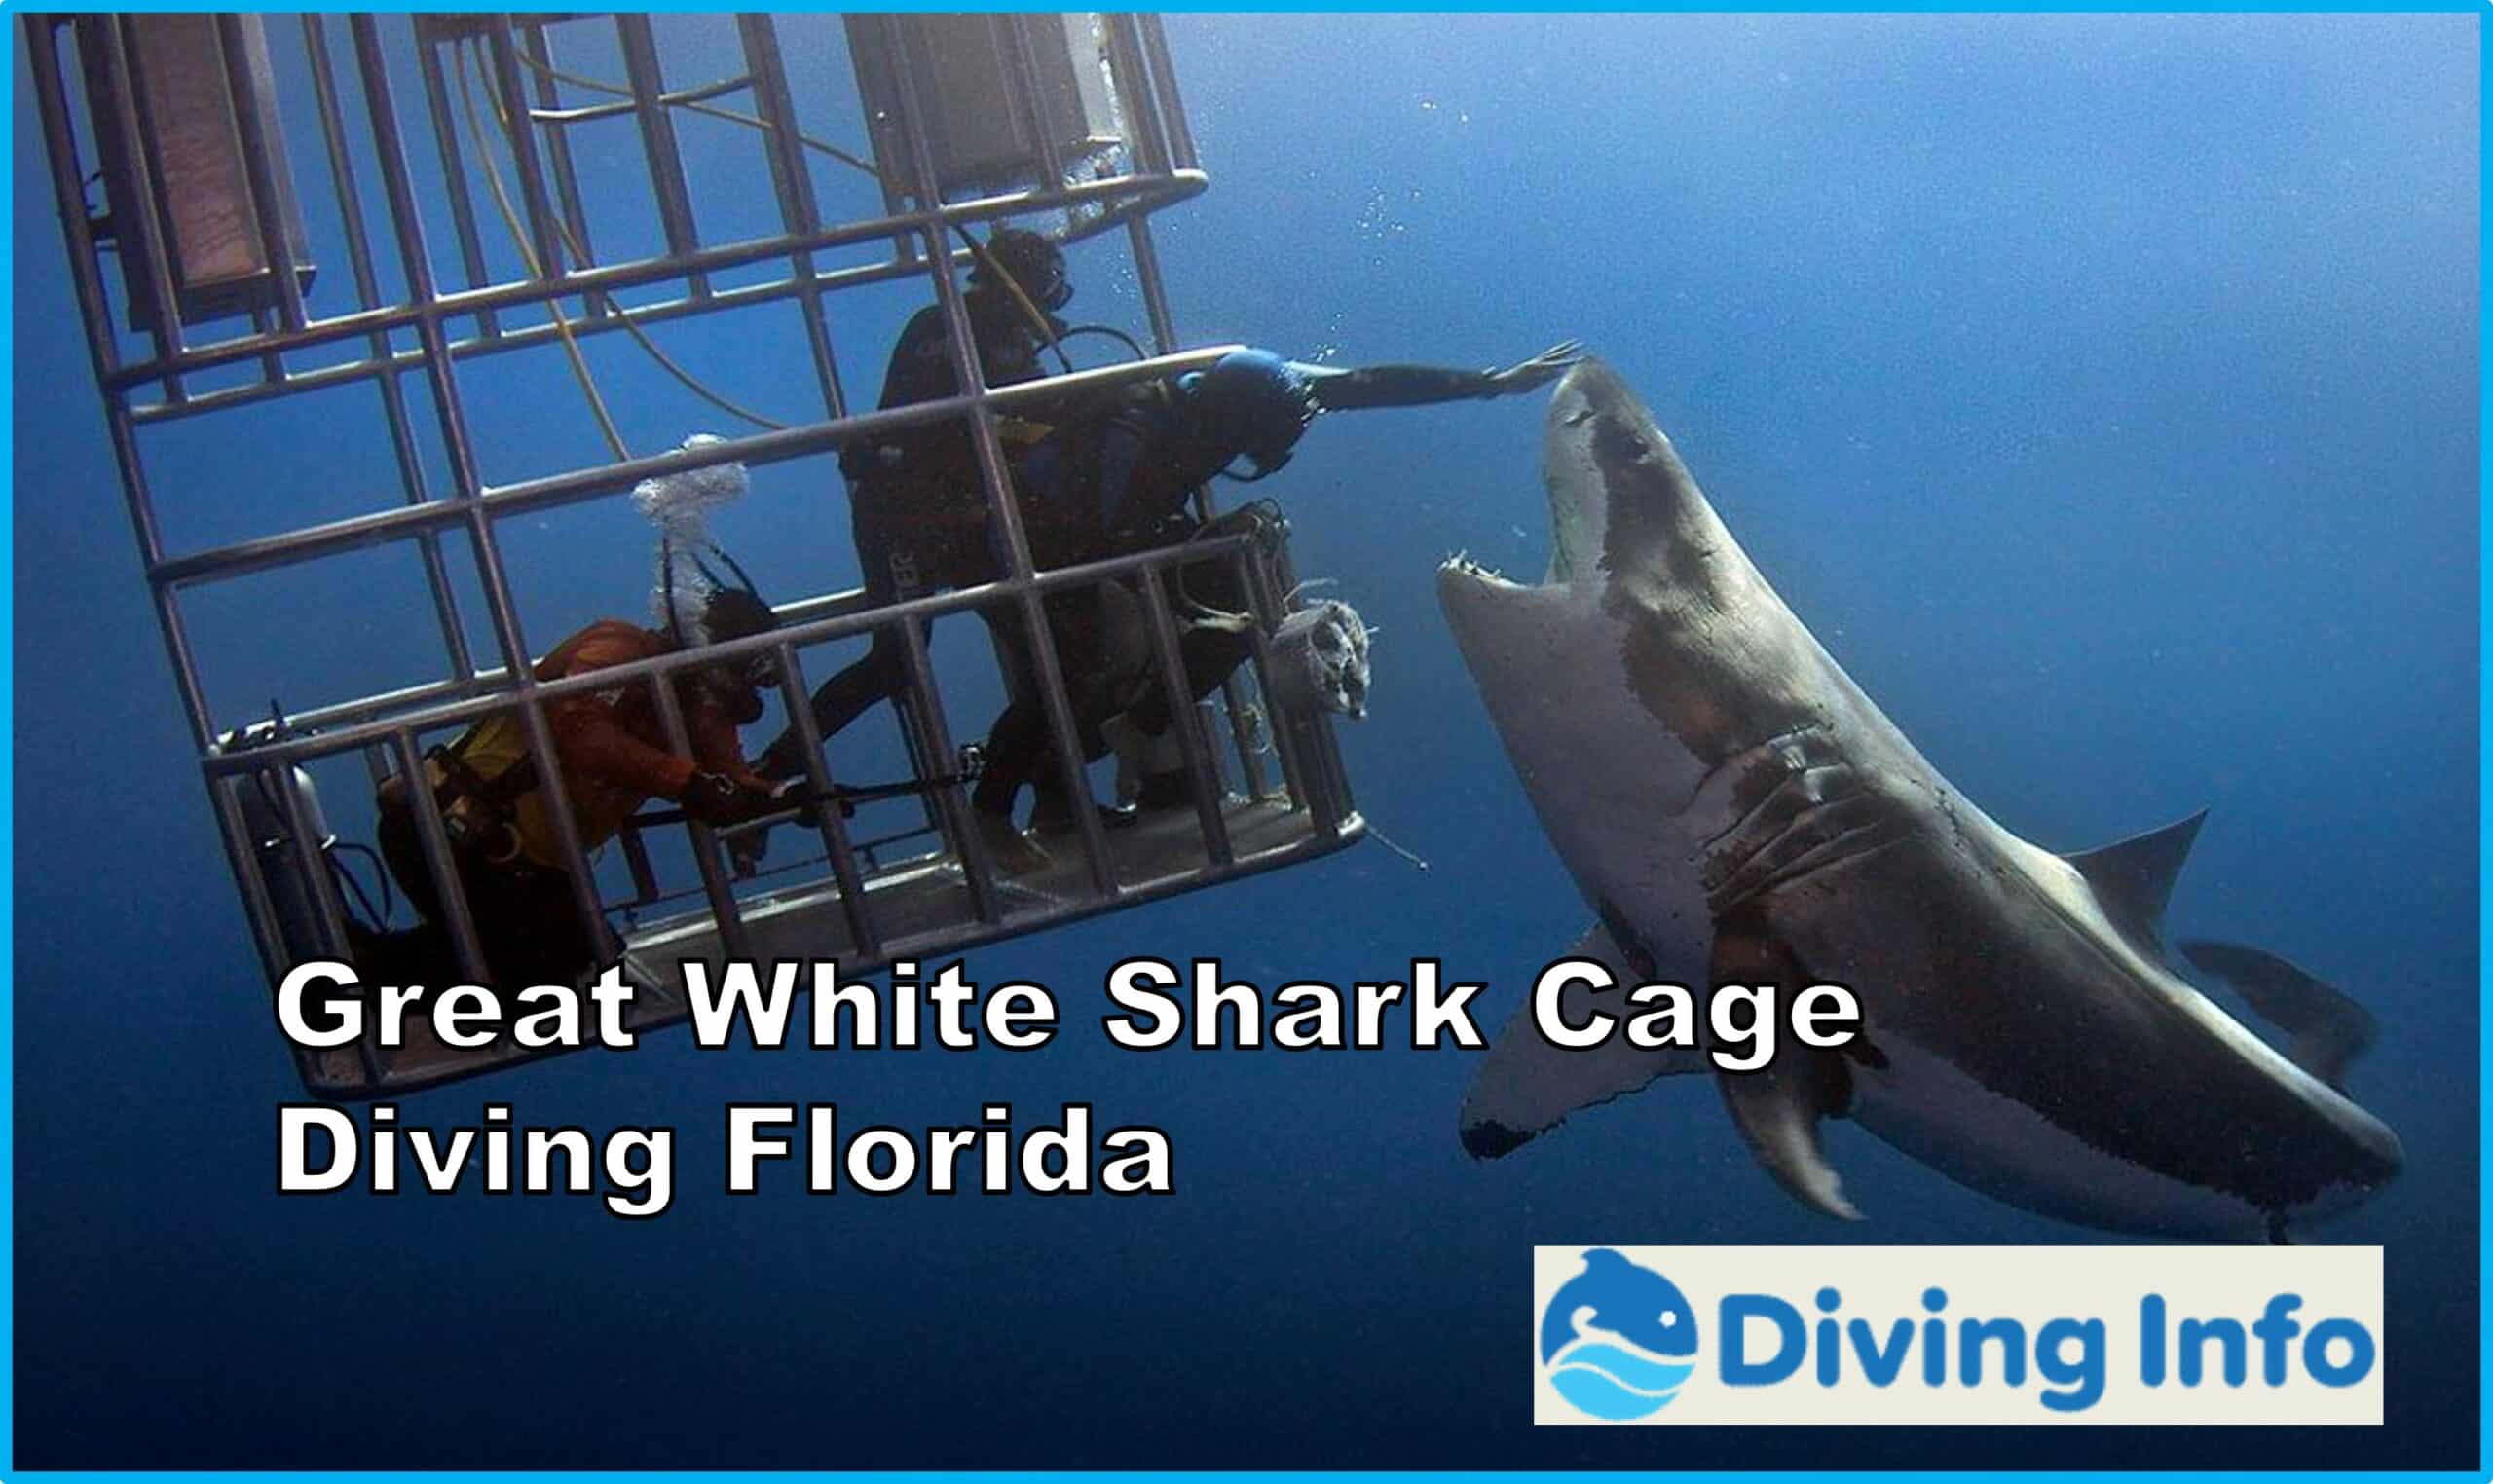 Great White Shark Cage Diving Florida